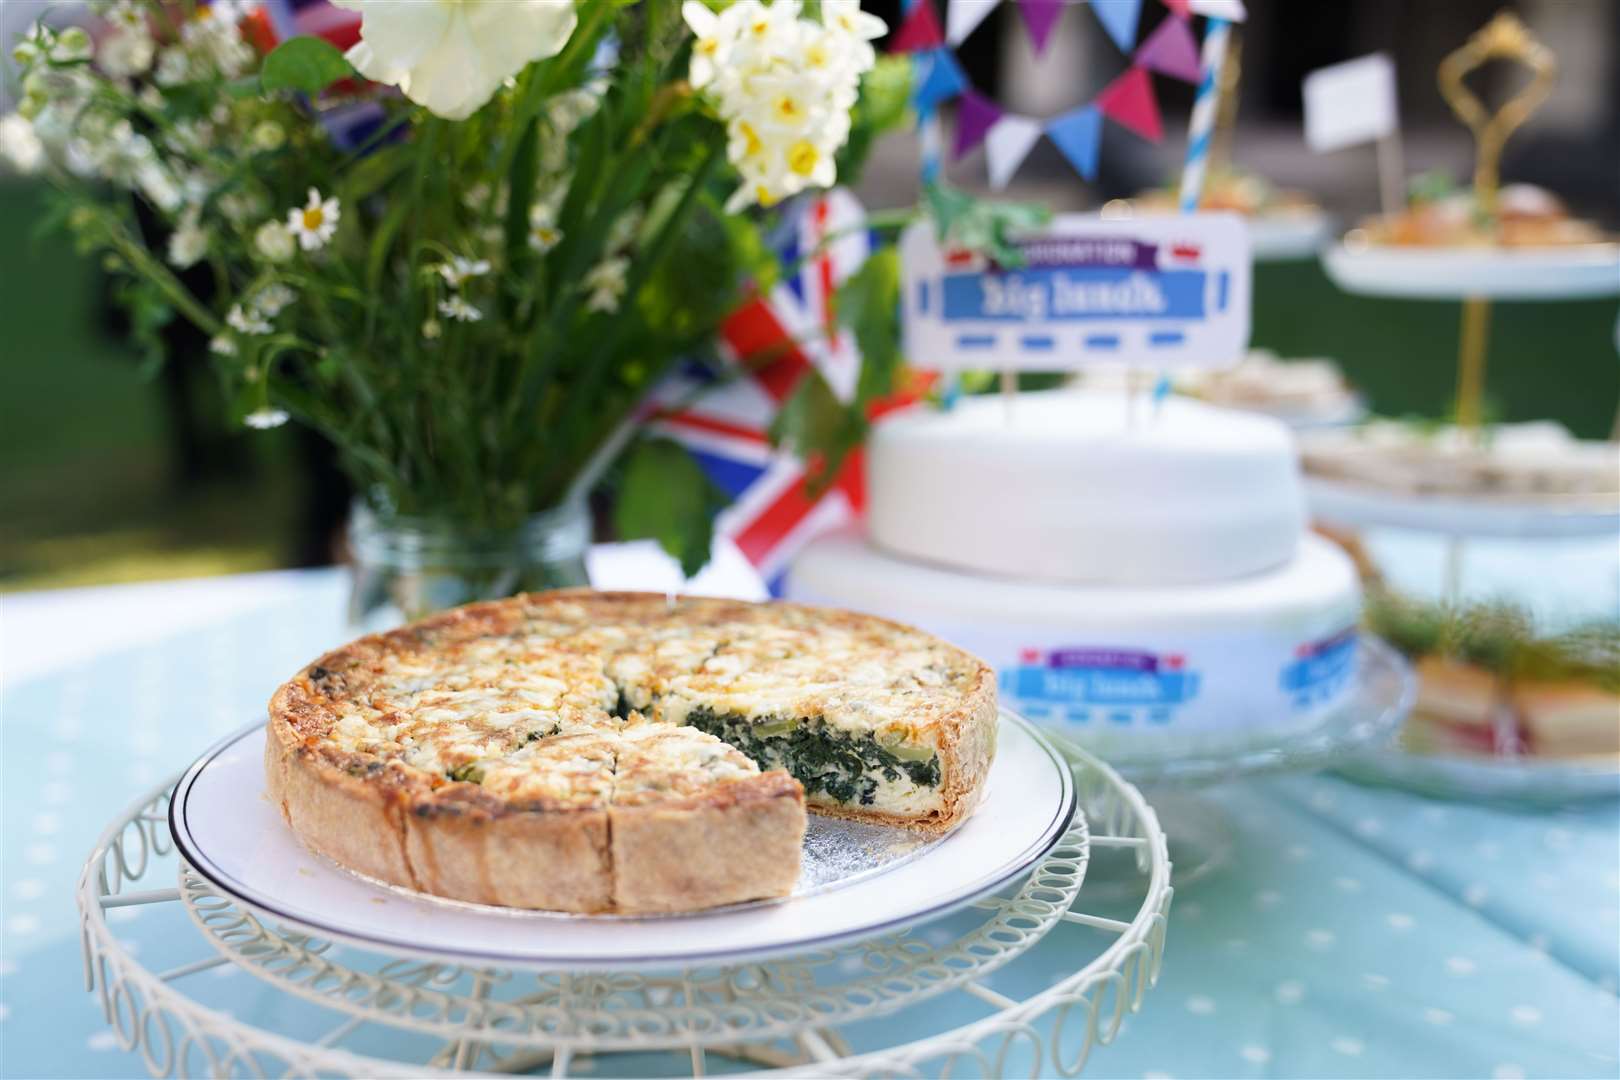 The official coronation quiche includes spinach and broad beans (James Manning/PA)